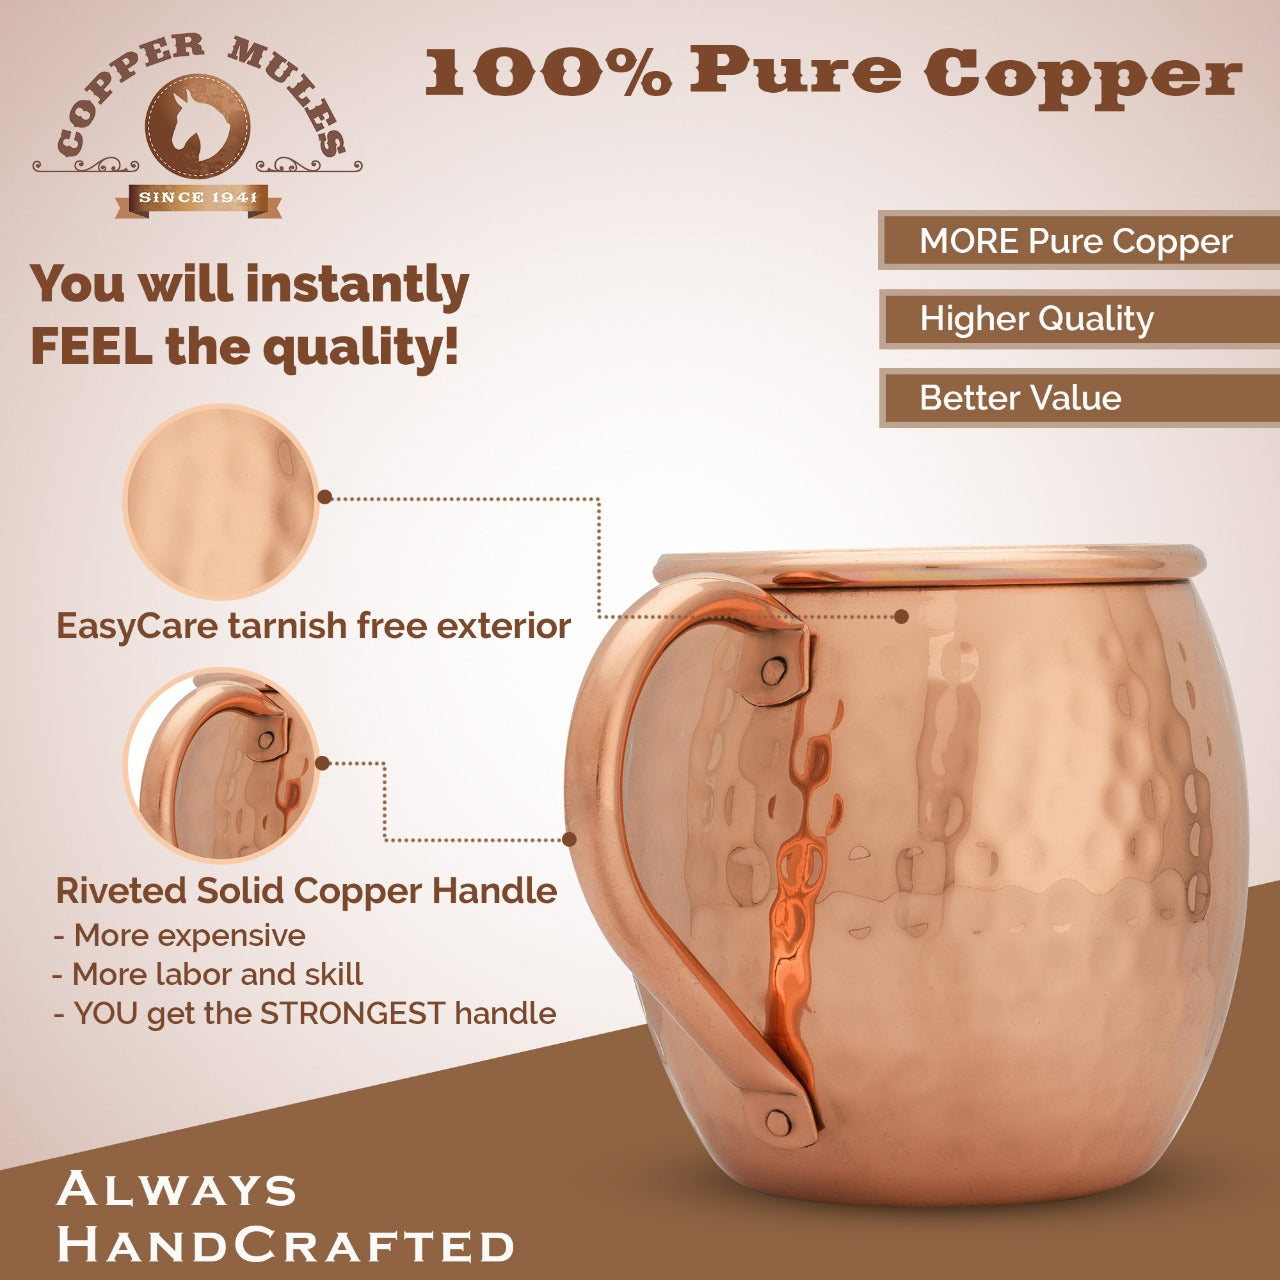 Moscow Mule Dimpled Copper Mug